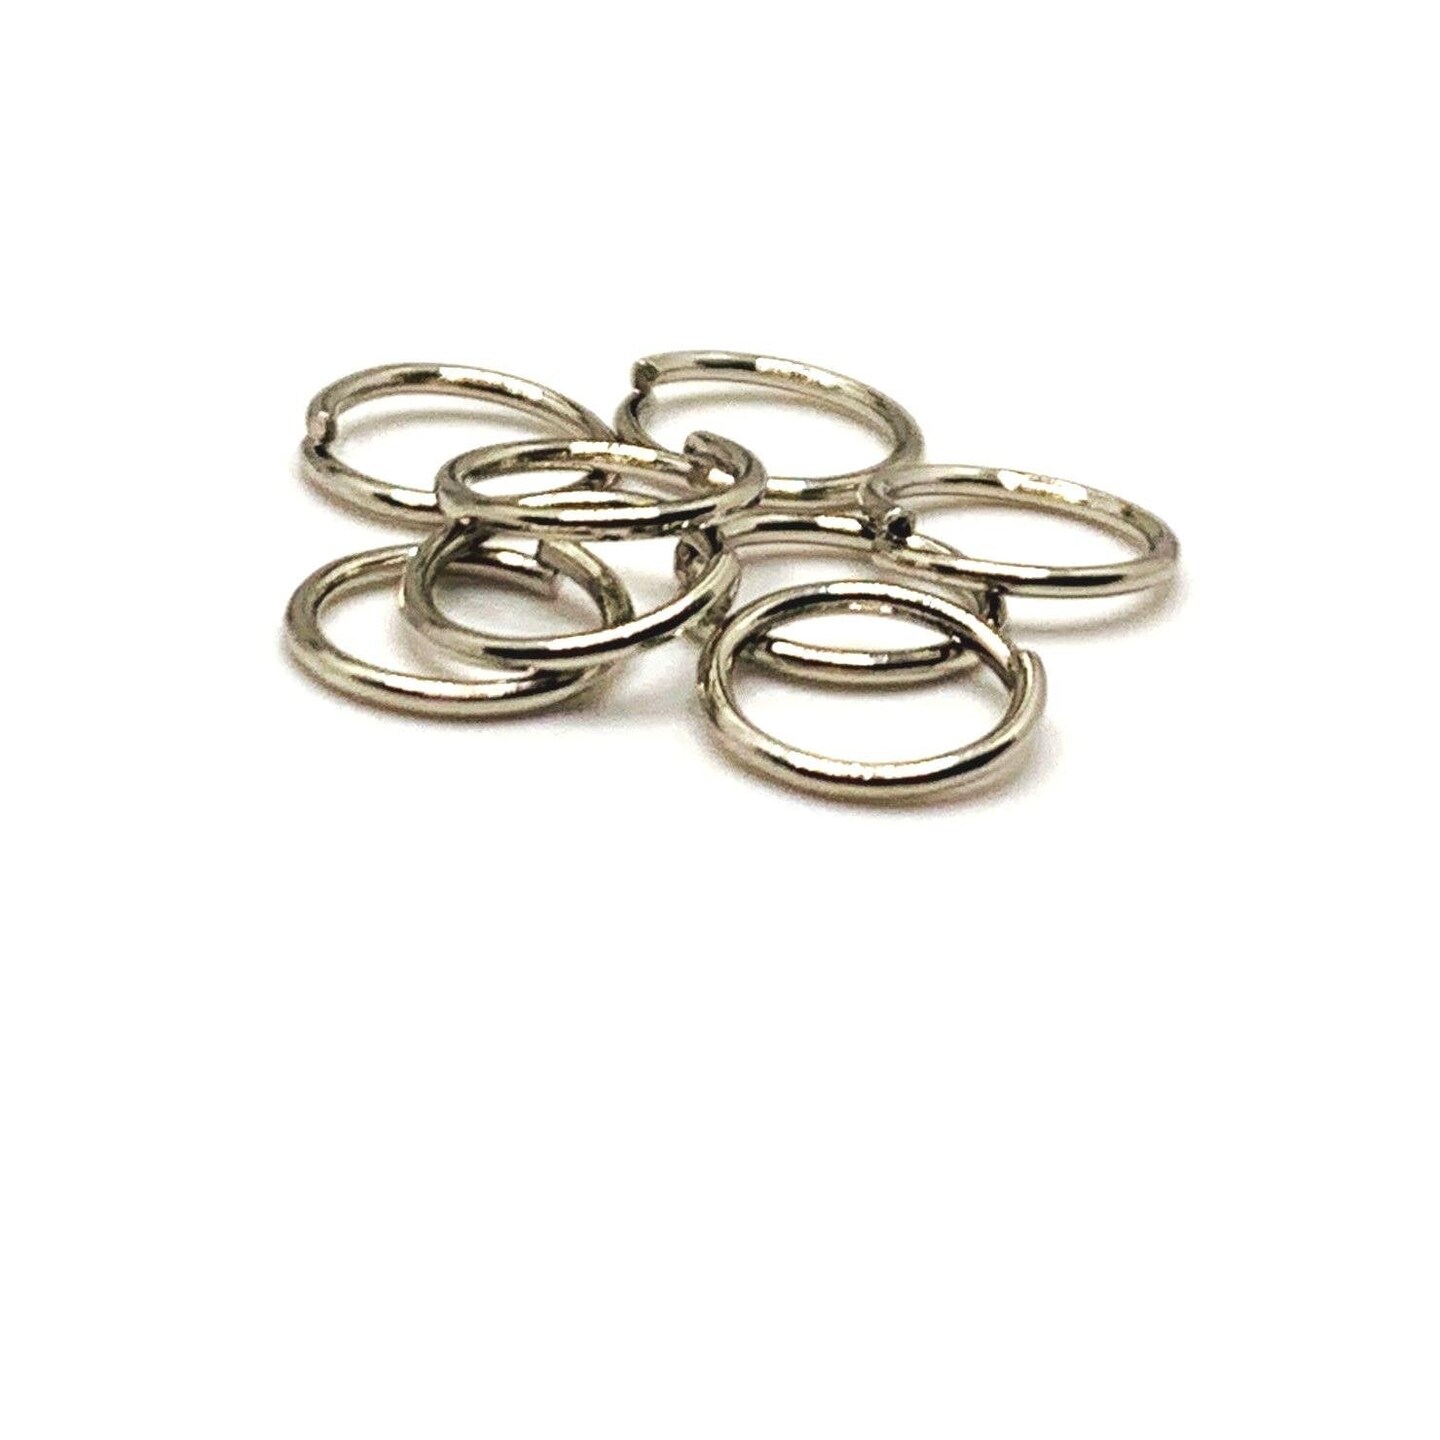 10 Pcs Bag of 8 mm 20g Silver Open Jump Rings